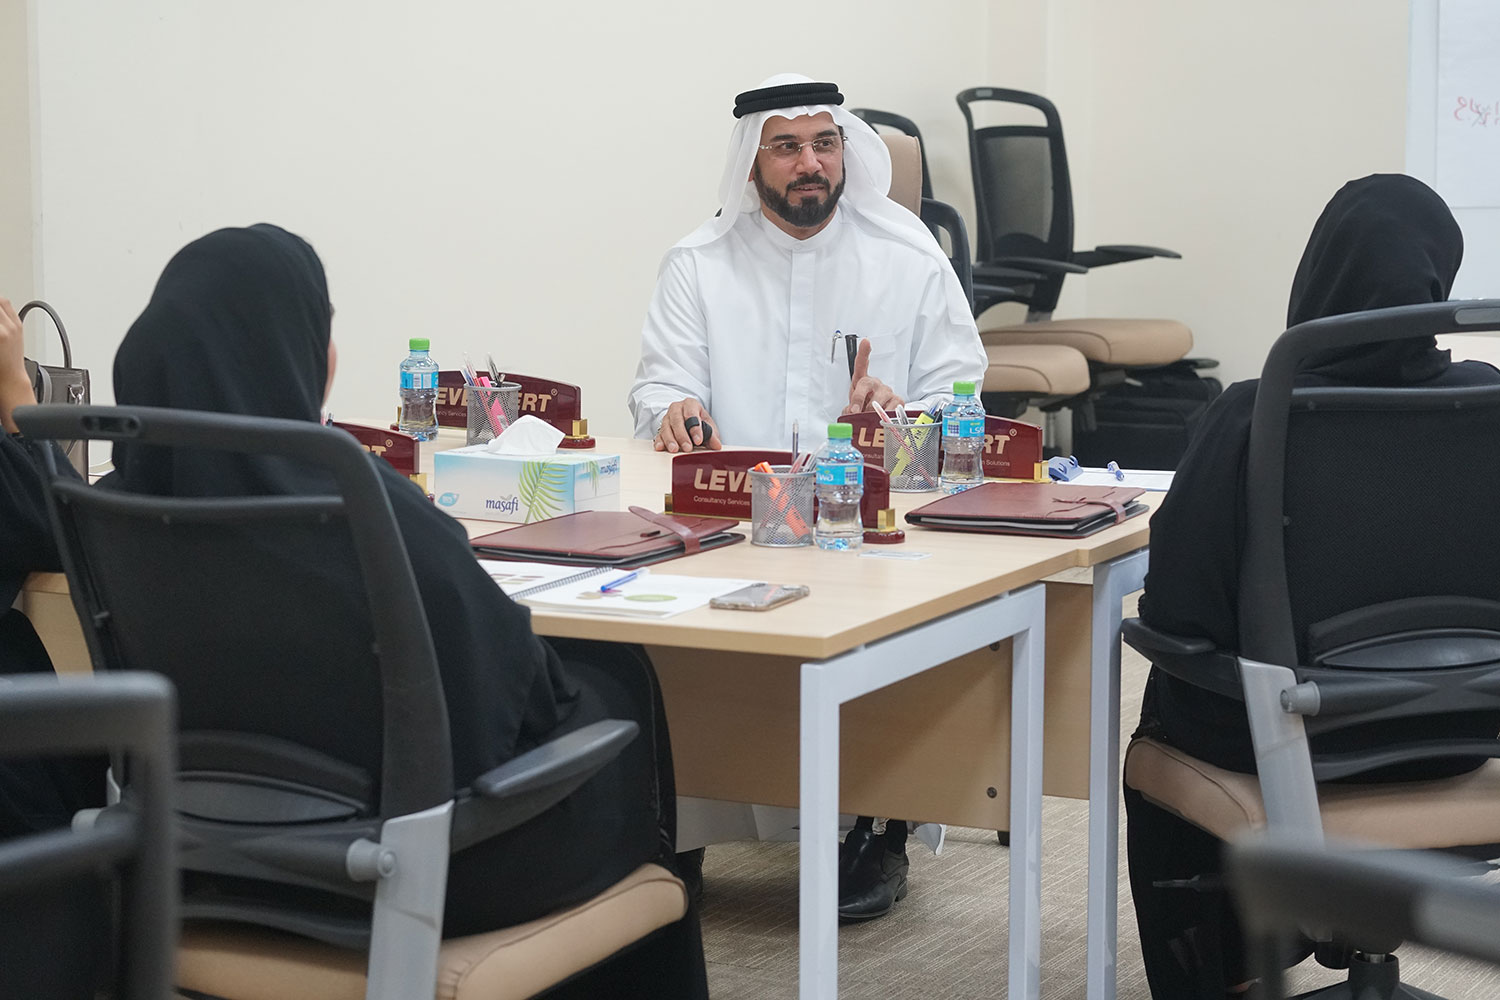 Employees which contributes in serving Sharjah community